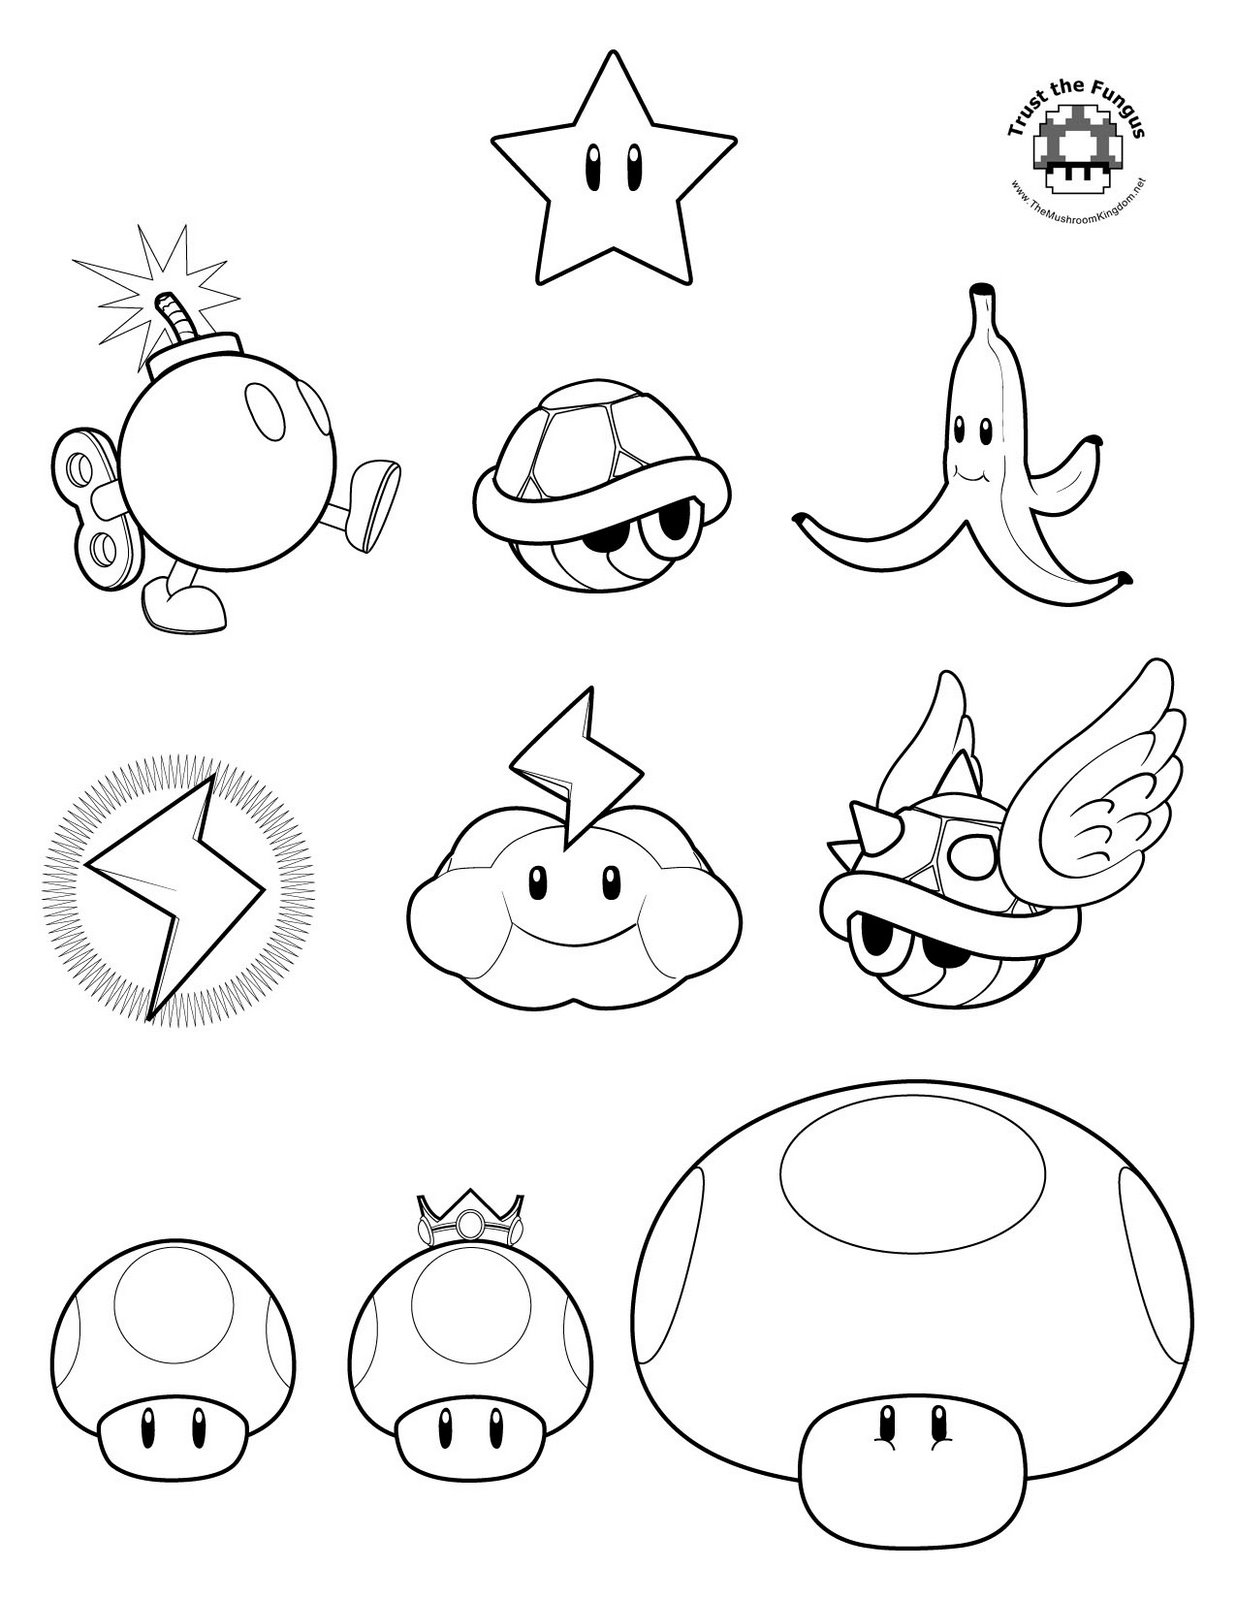 Mario Kart image to download and color Mario Kart Kids Coloring Pages